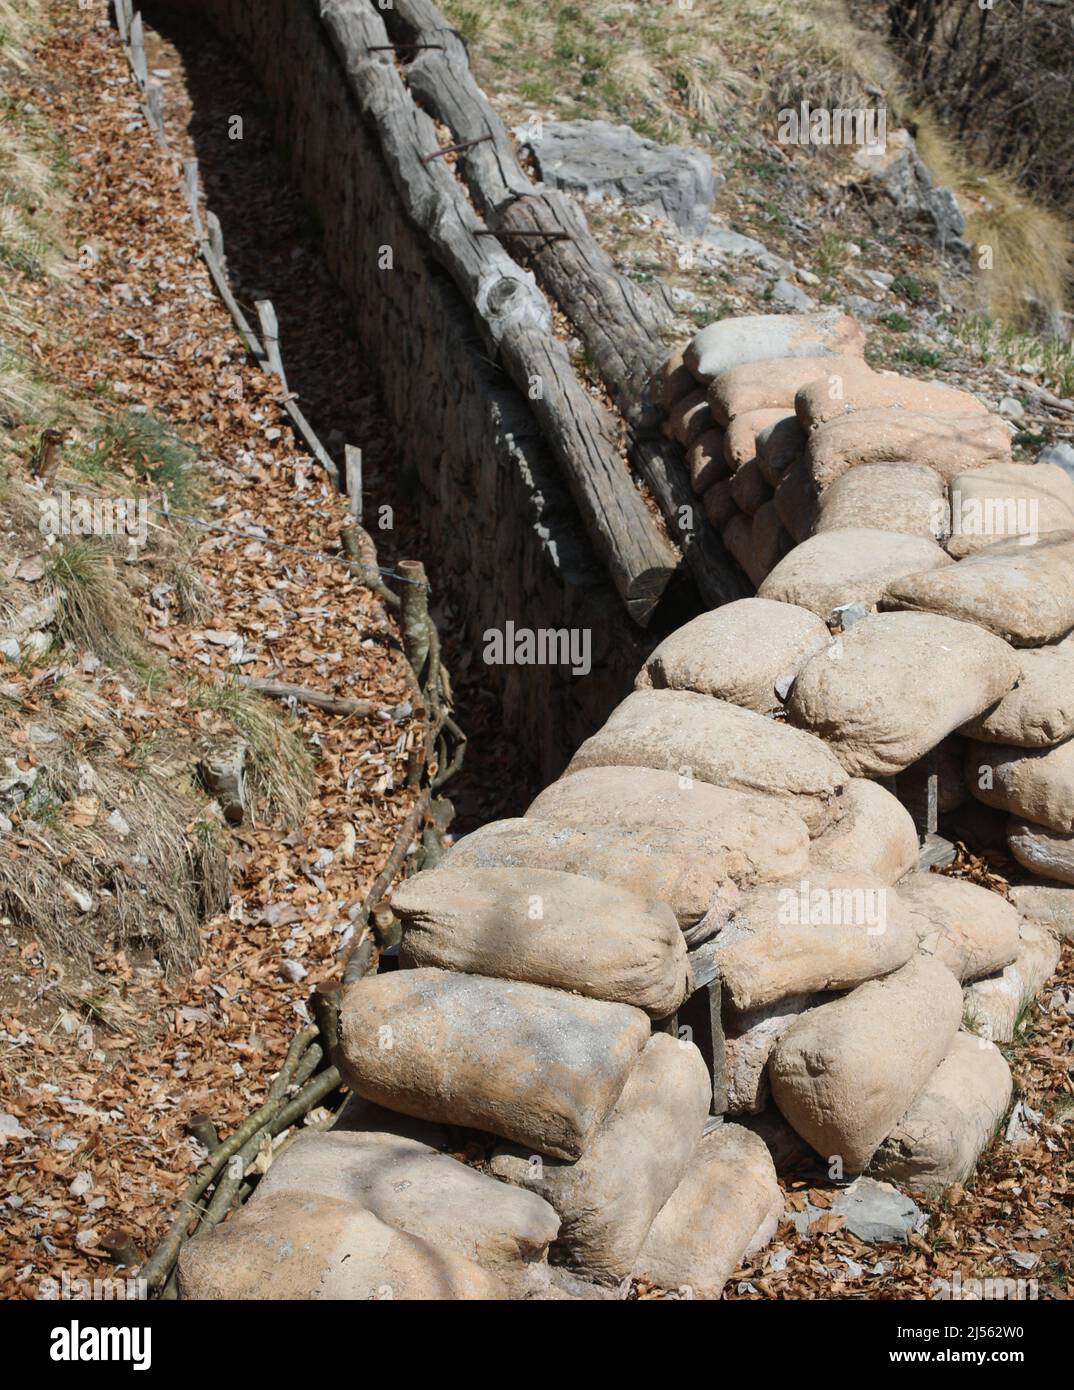 many sandbags to protect the trench dug in the ground by soldiers during the war Stock Photo